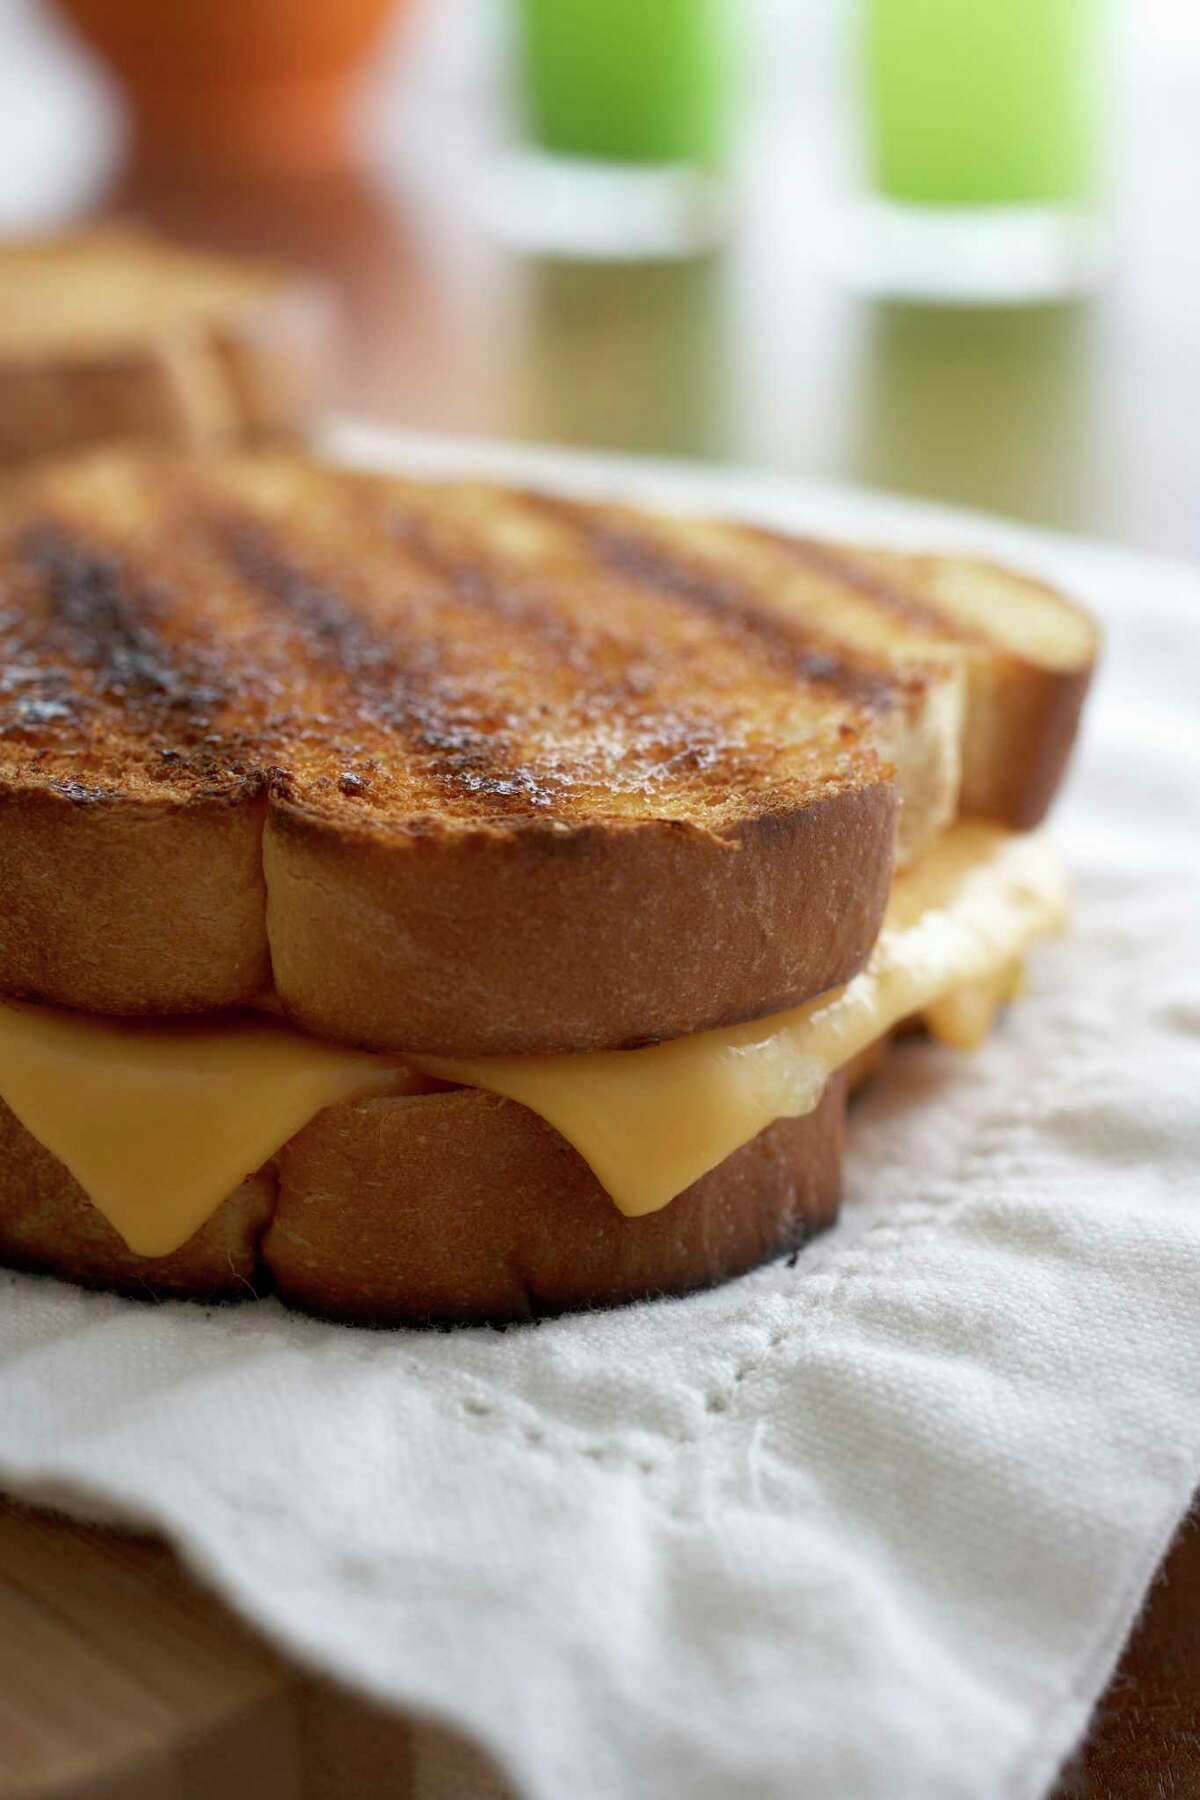 Grilled cheese: a Harvey staple.